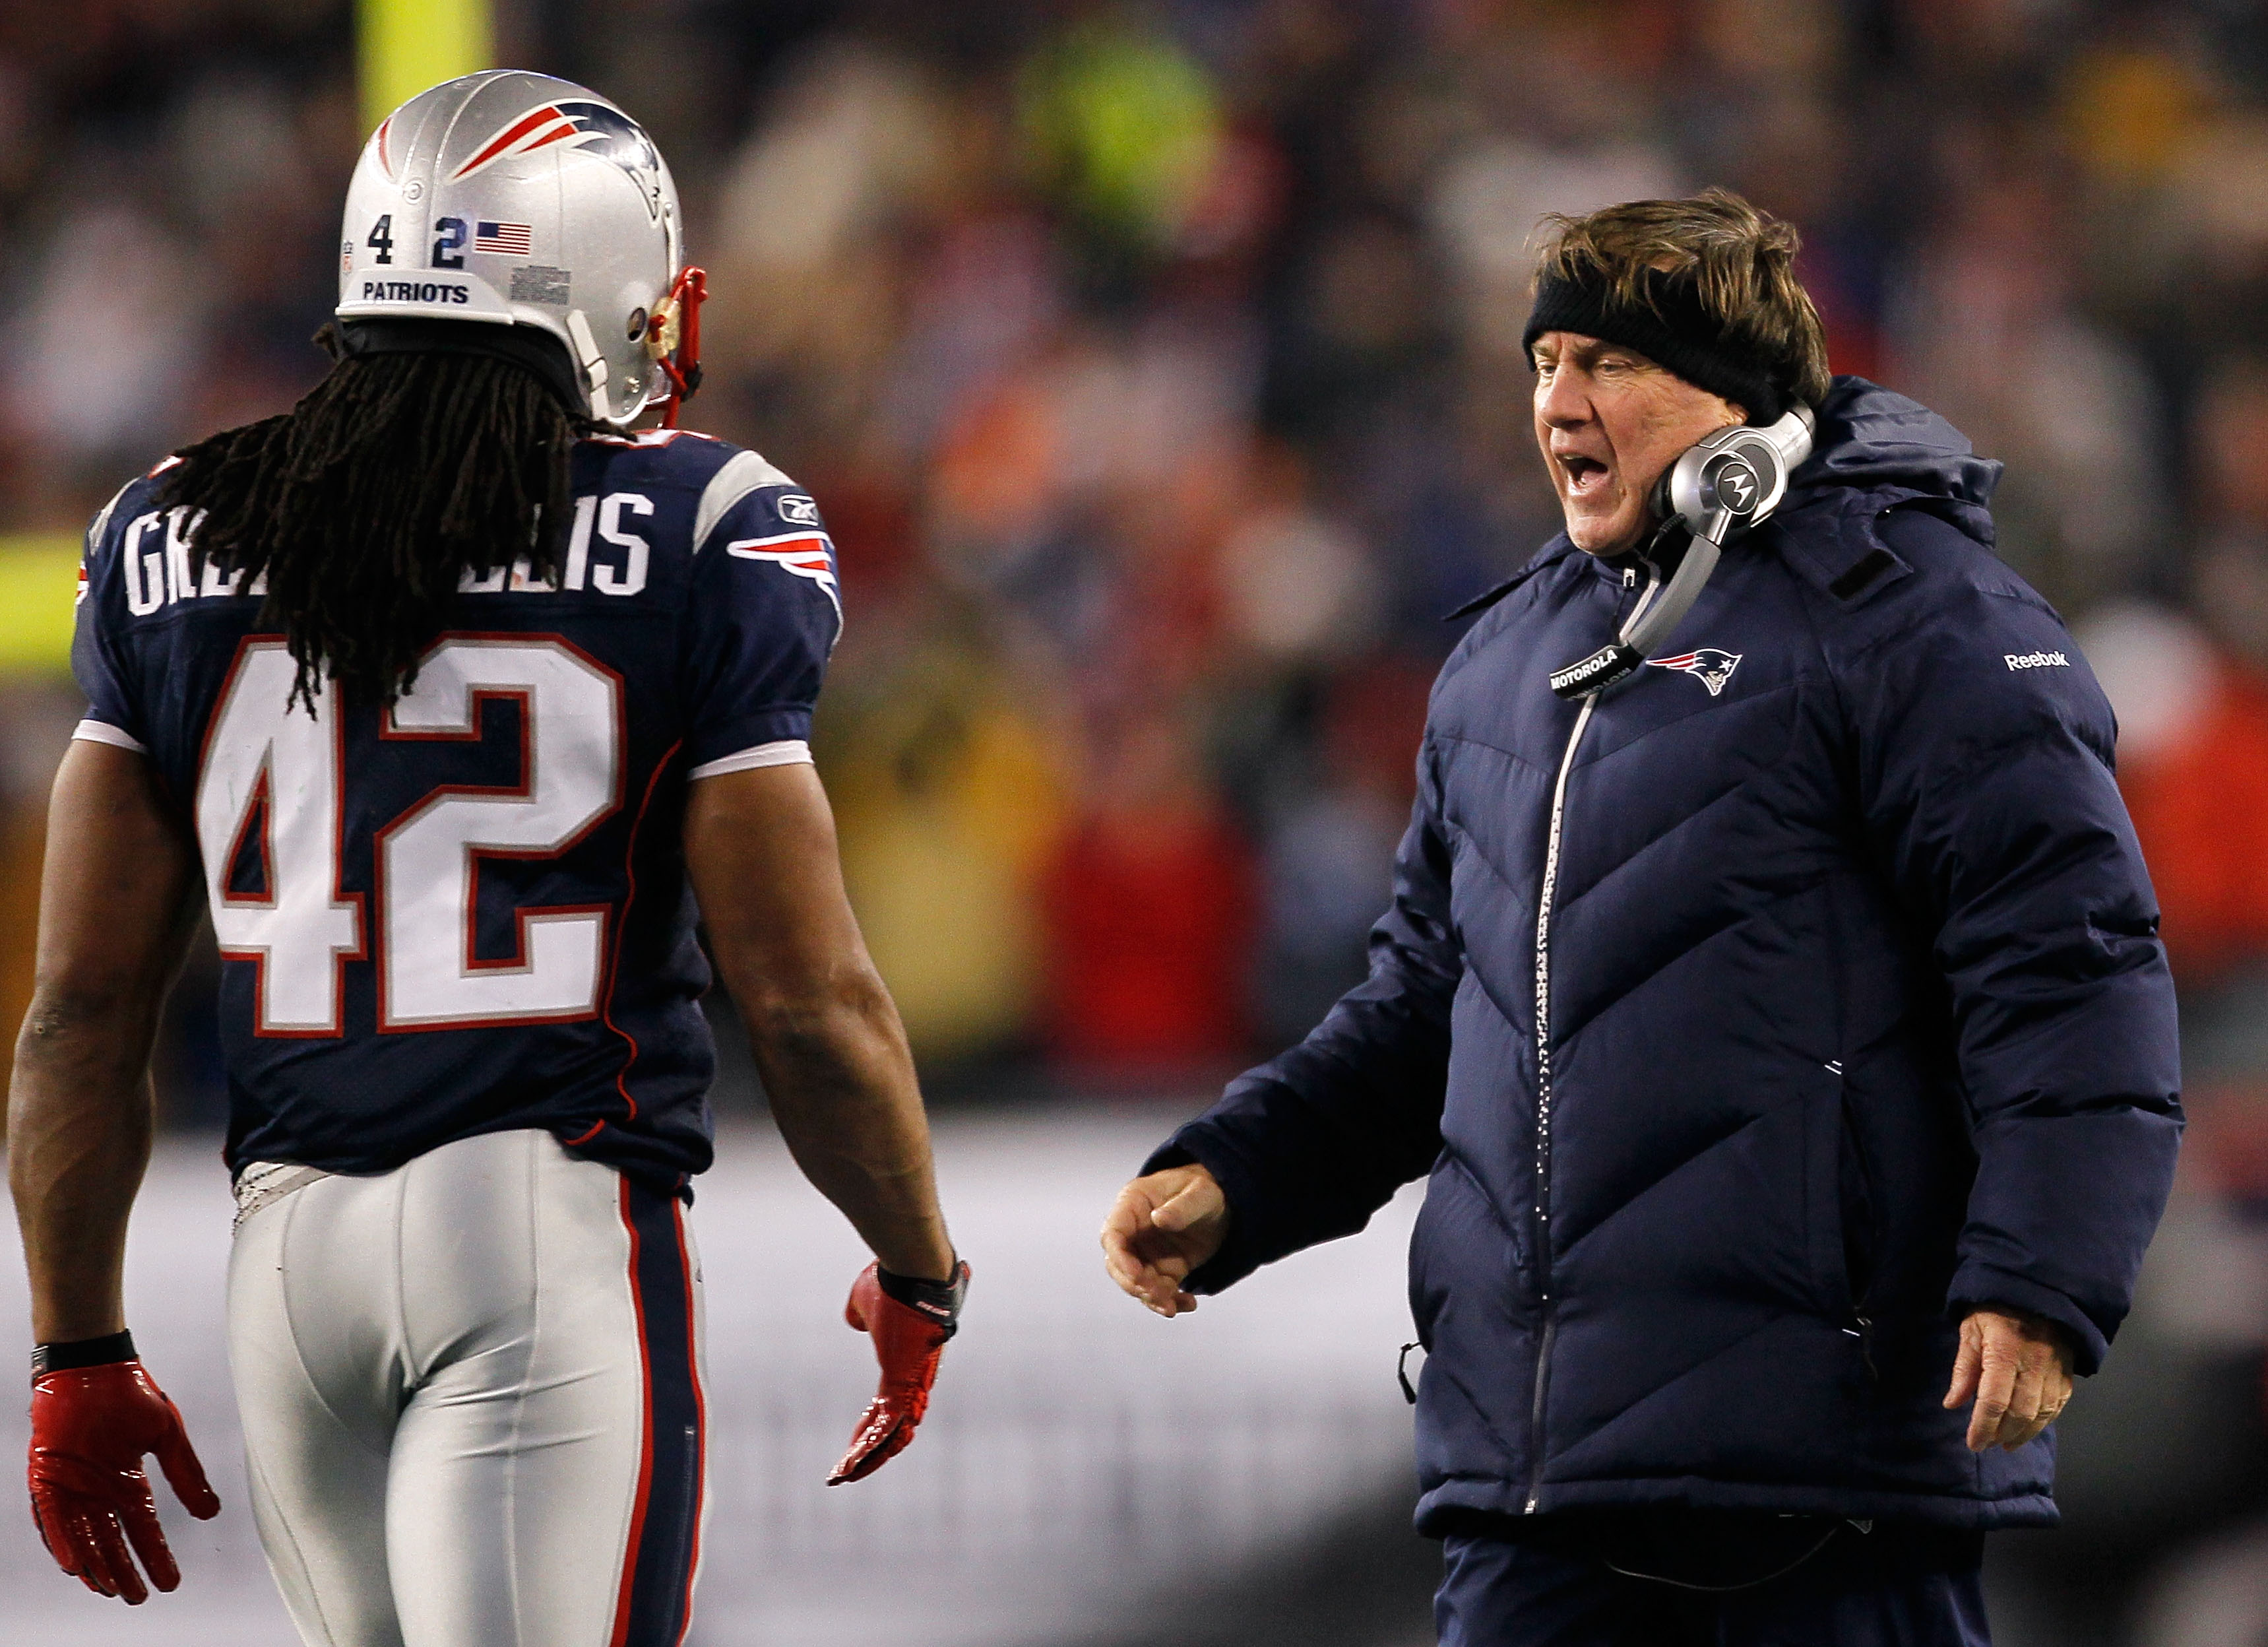 FOXBORO, MA - DECEMBER 06:  Head coach Bill Belichick of the New England Patriots congratulates BenJarvus Green-Ellis #42 after Green-Ellis scored a 5-yard rushing touchdown in the fourth quarter against the New York Jets at Gillette Stadium on December 6